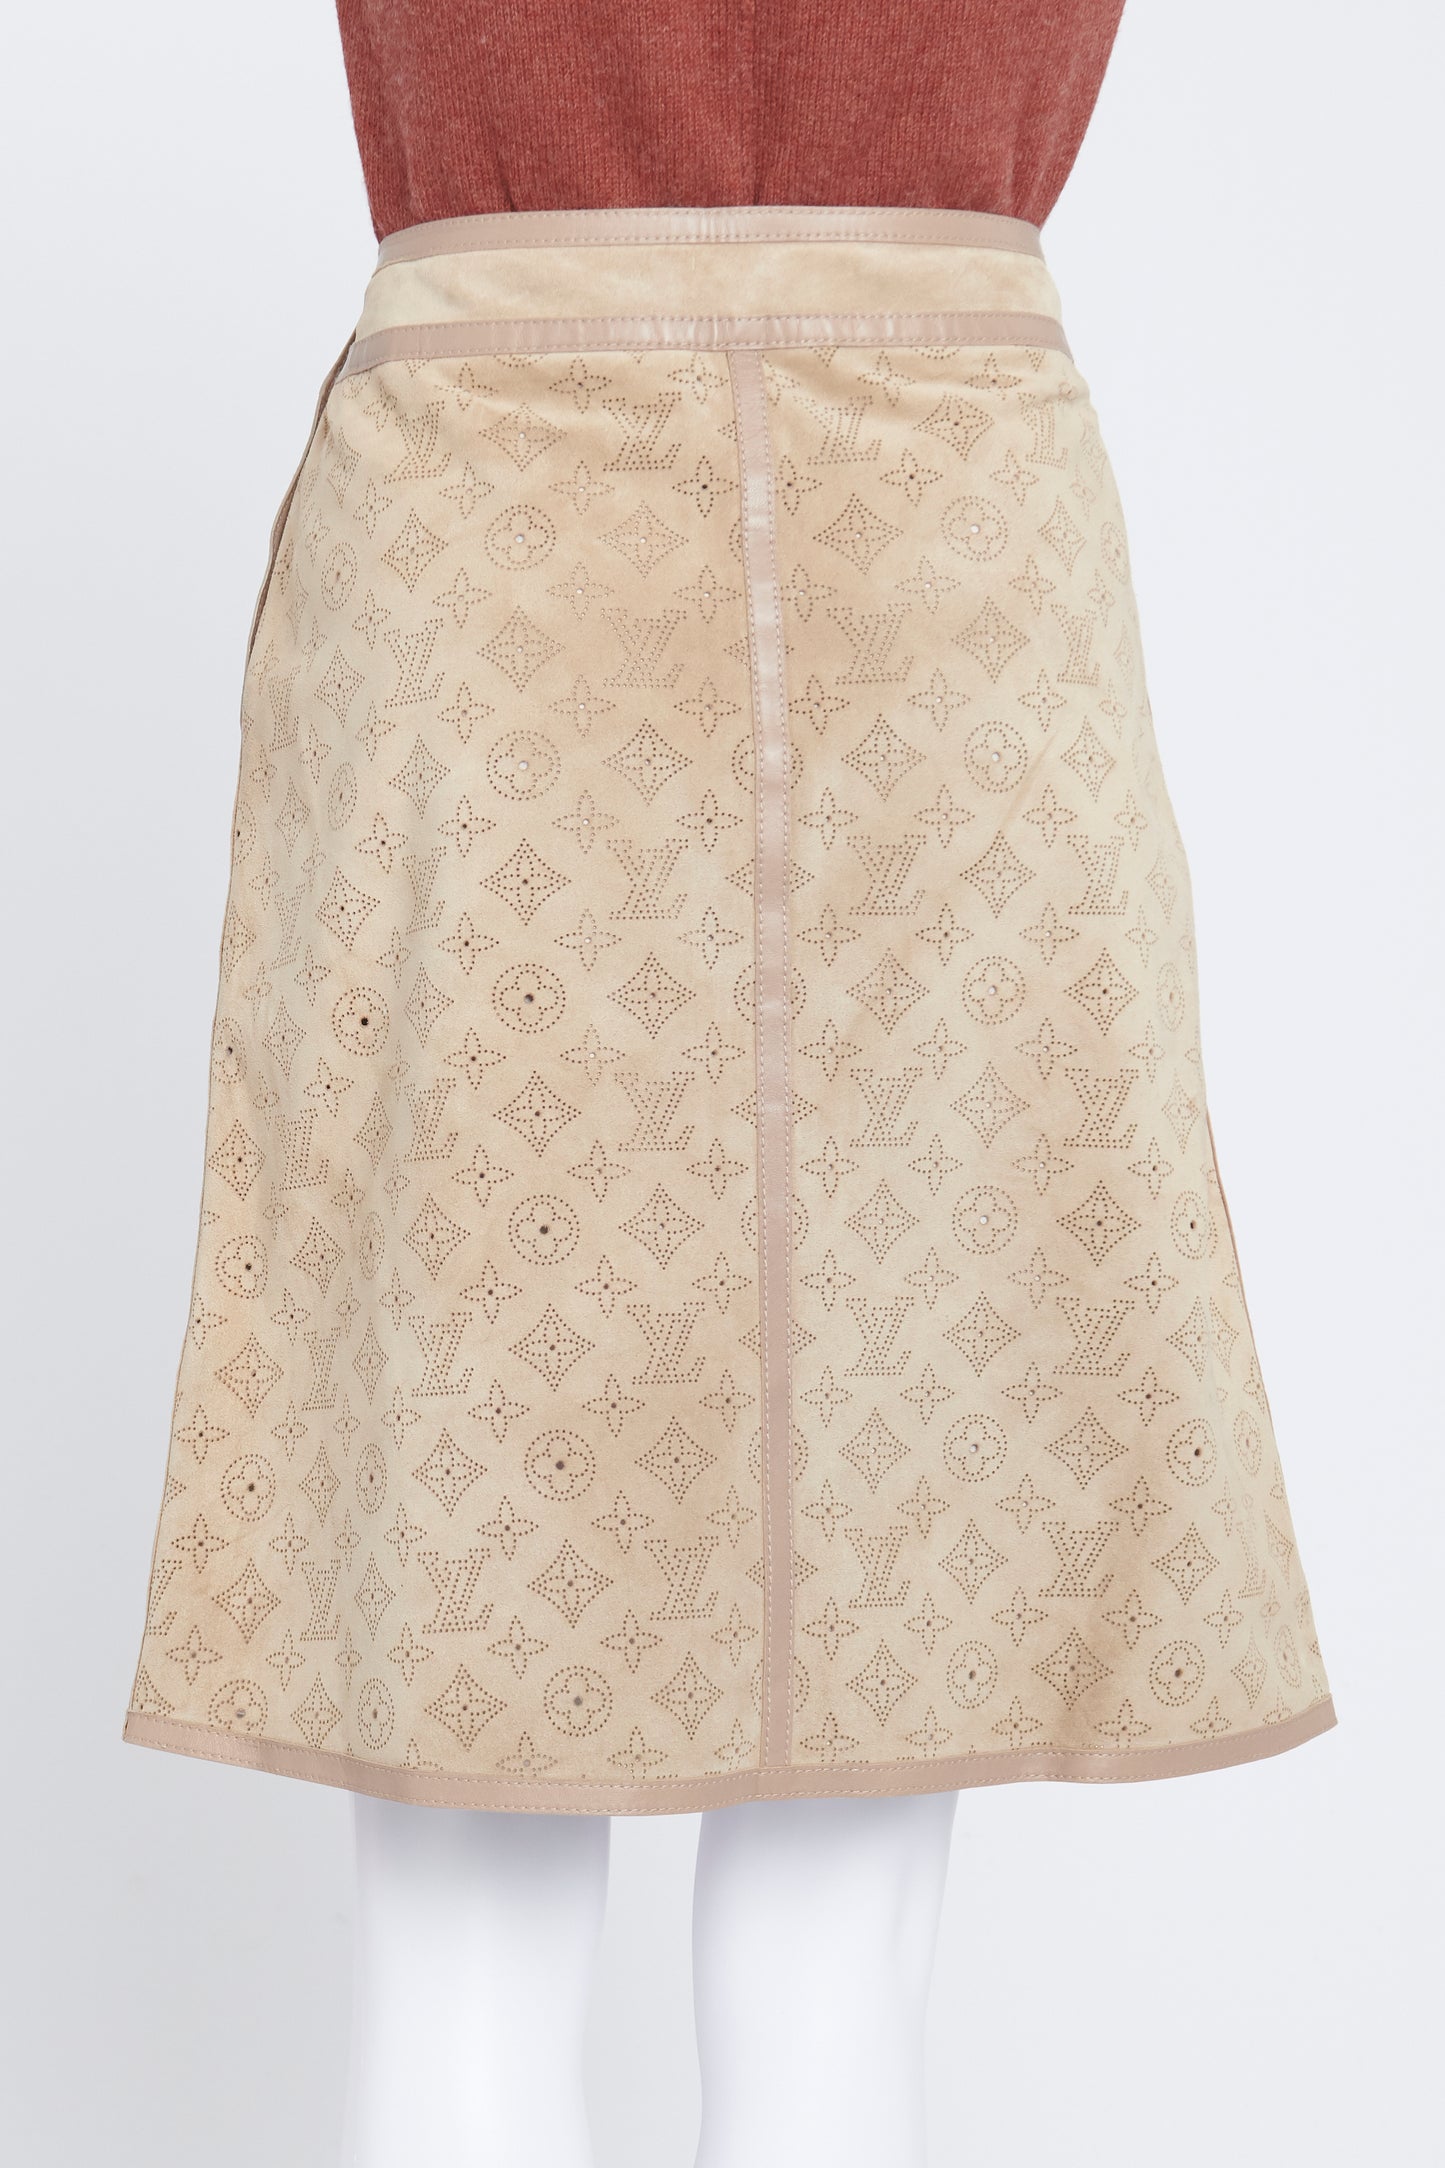 Tan Monogram Suede And Leather Skirt